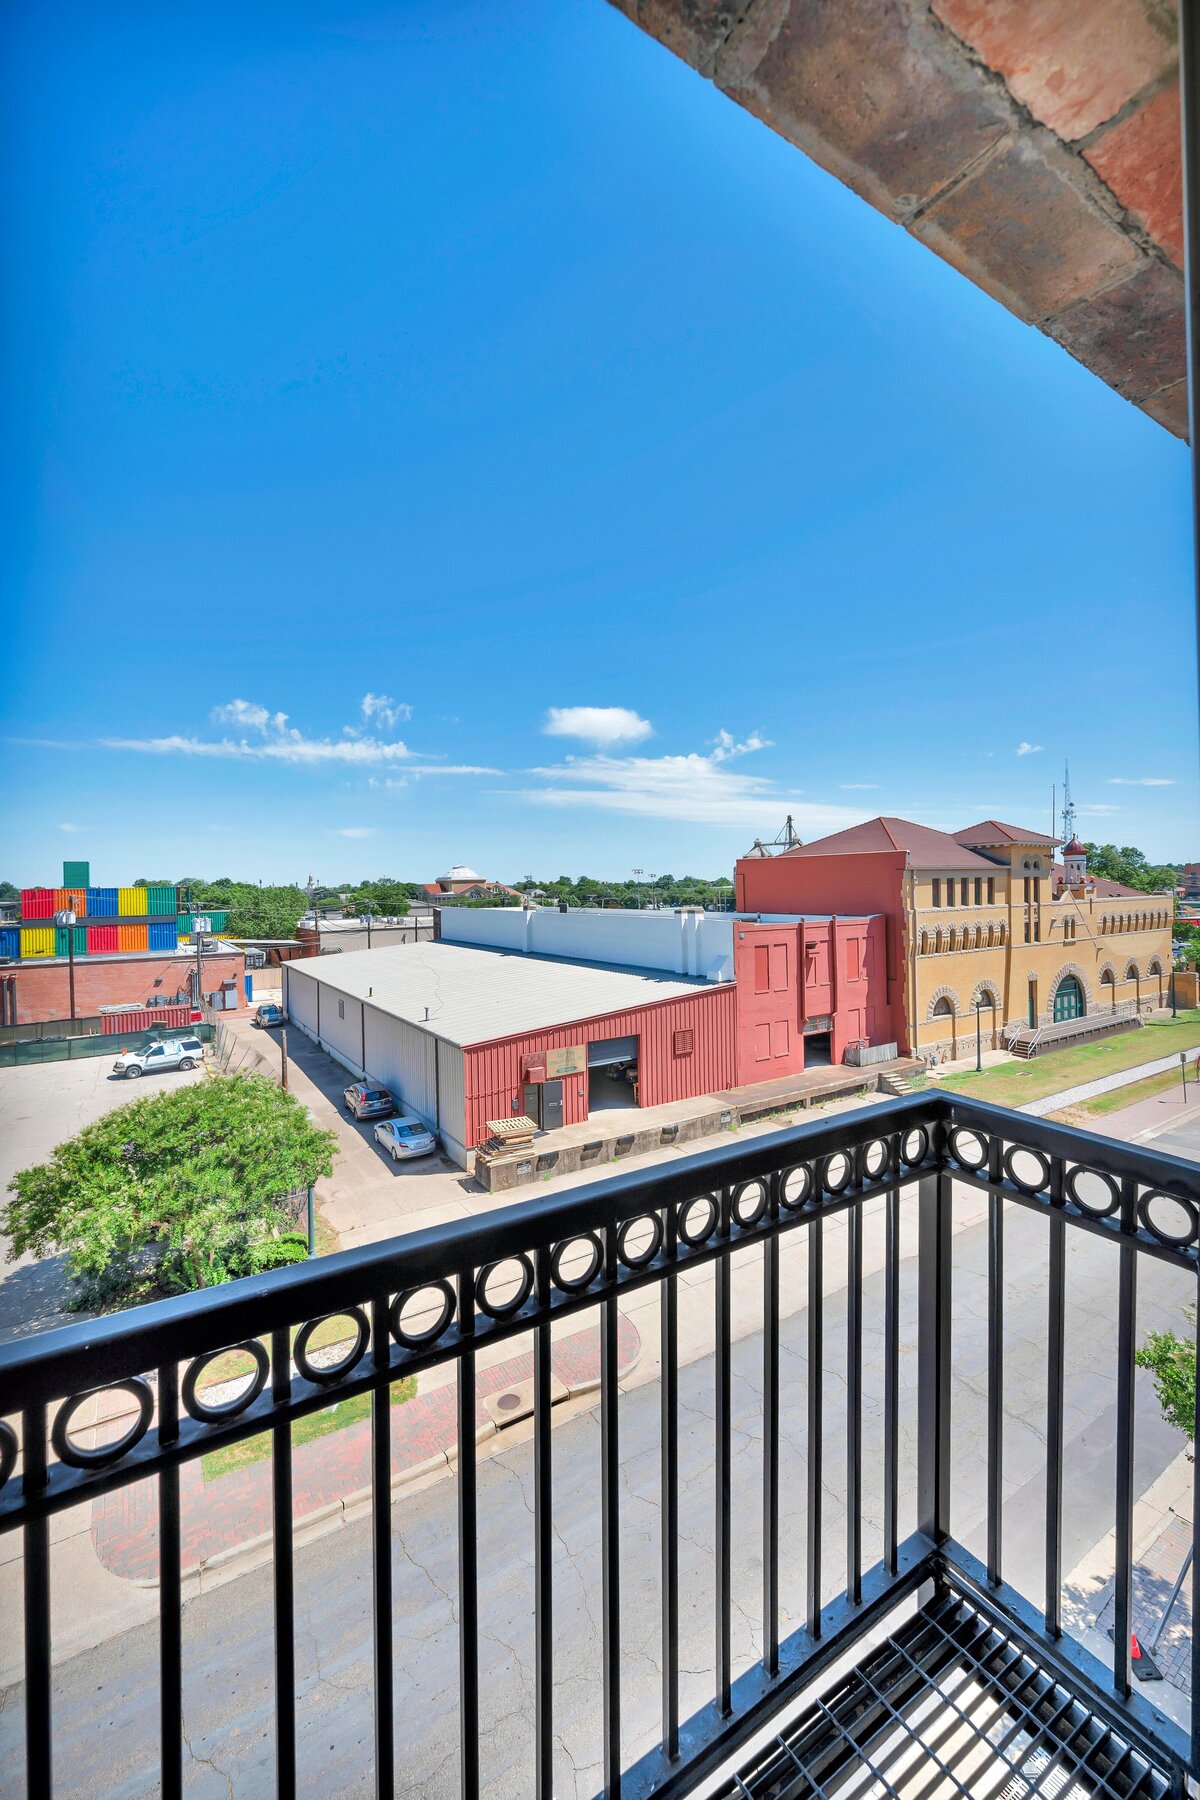 Third floor view from the balcony of this one-bedroom, one-bathroom vintage condo that sleeps 4 in the historic Behrens building in the heart of the Magnolia Silo District in downtown Waco, TX.